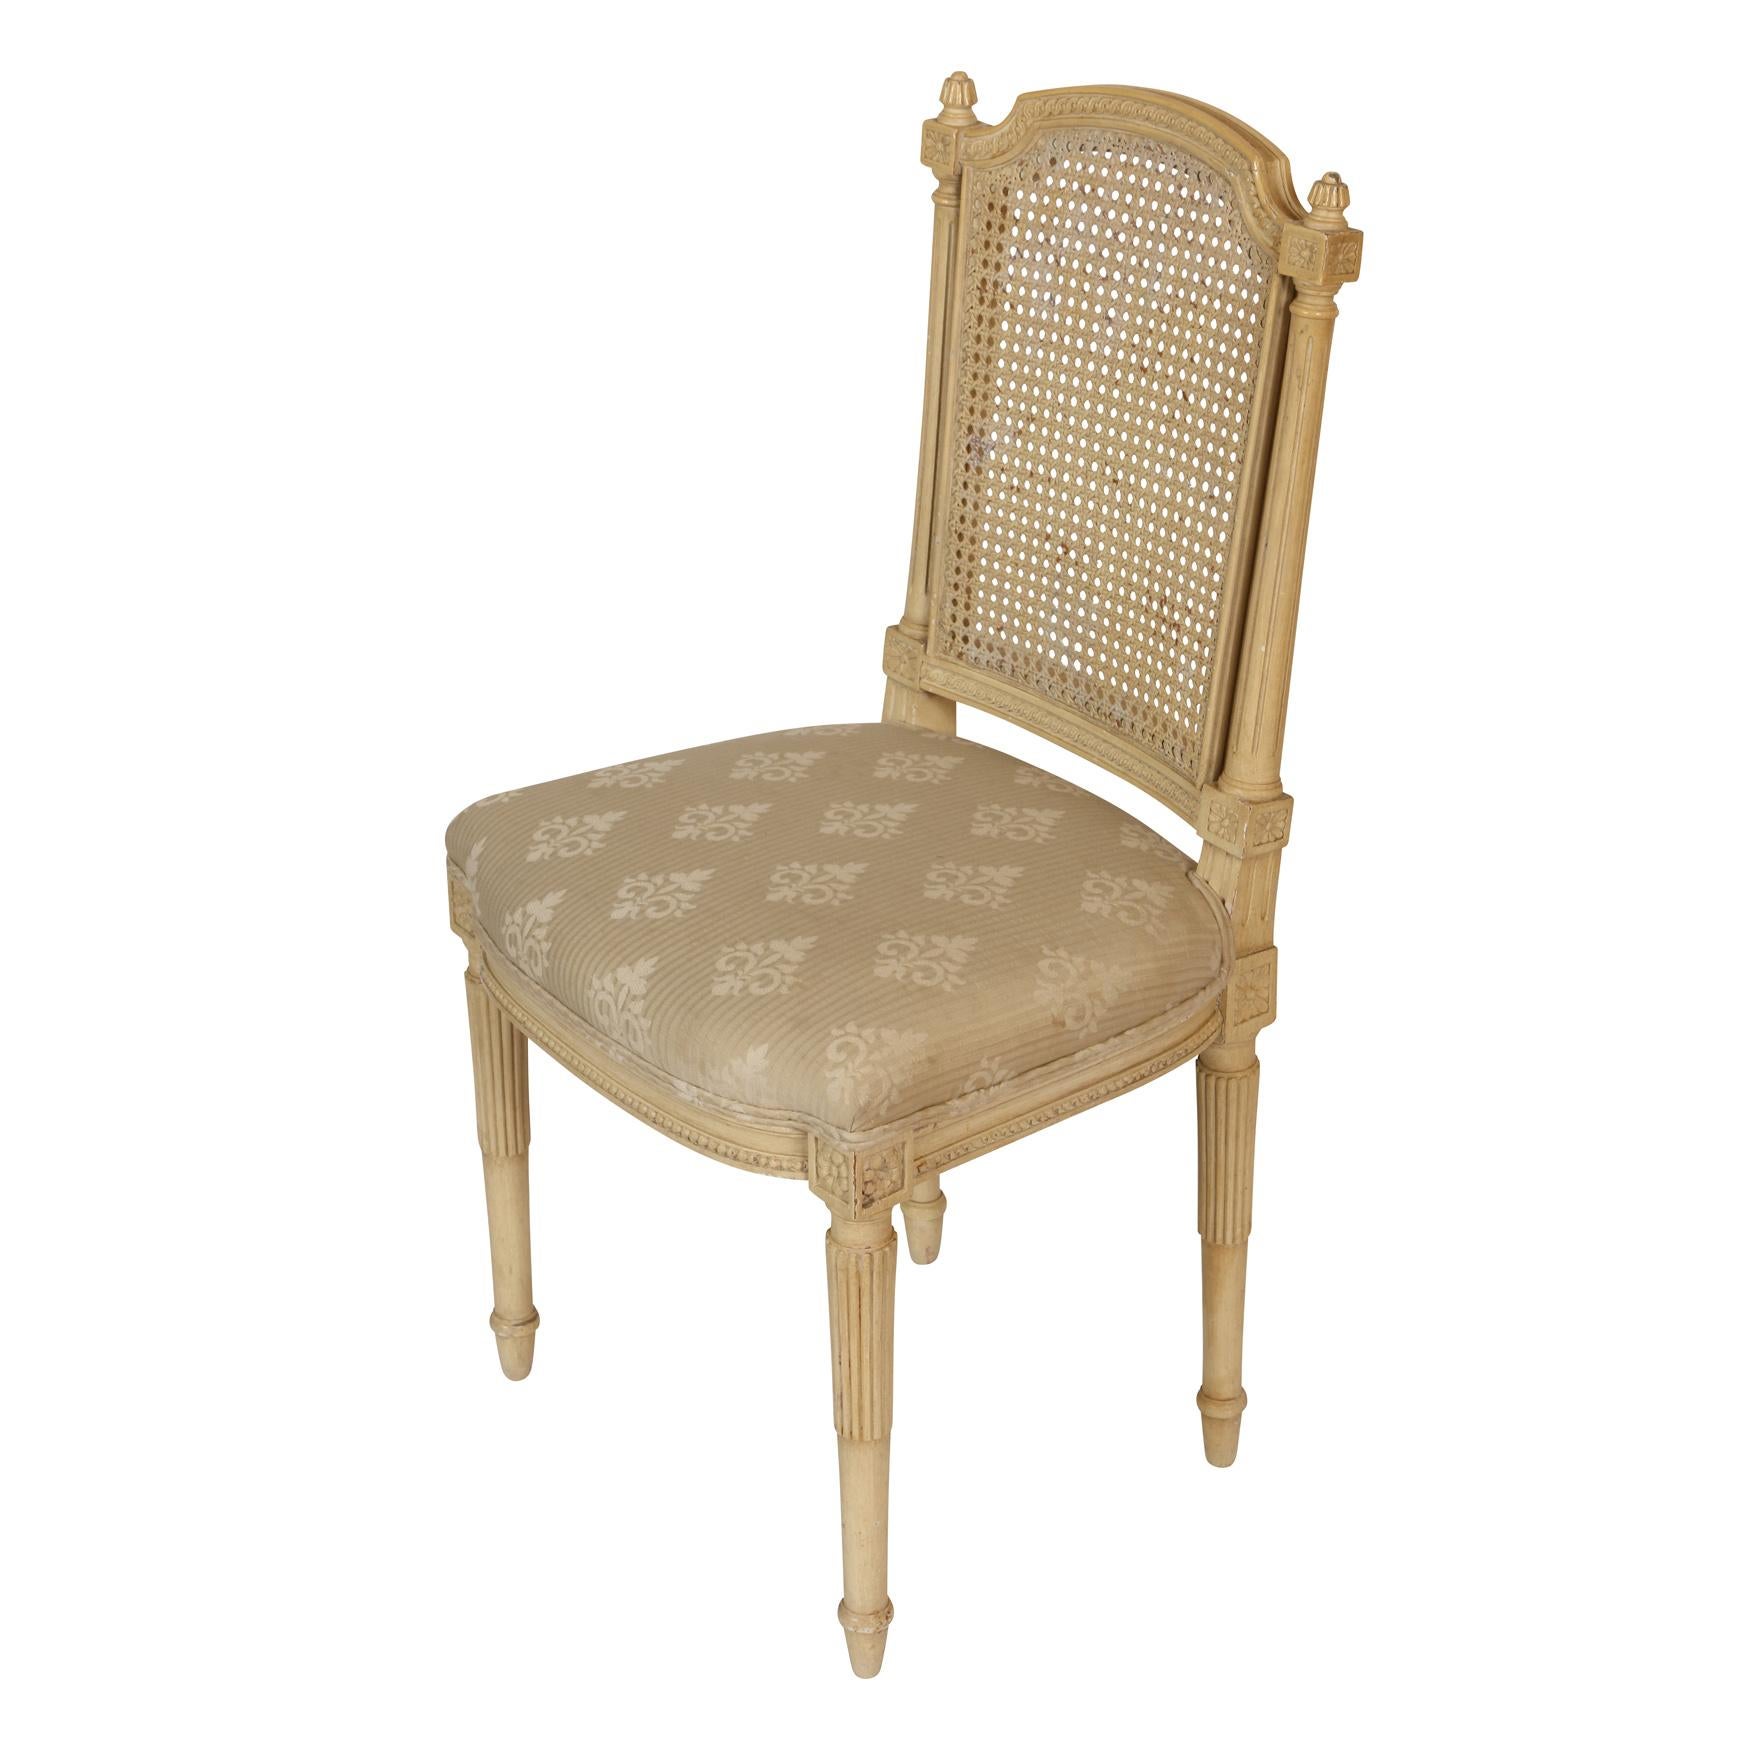 Set of Four Caned Back Dining Chairs with Upholstered Seats im Zustand „Gut“ im Angebot in Locust Valley, NY